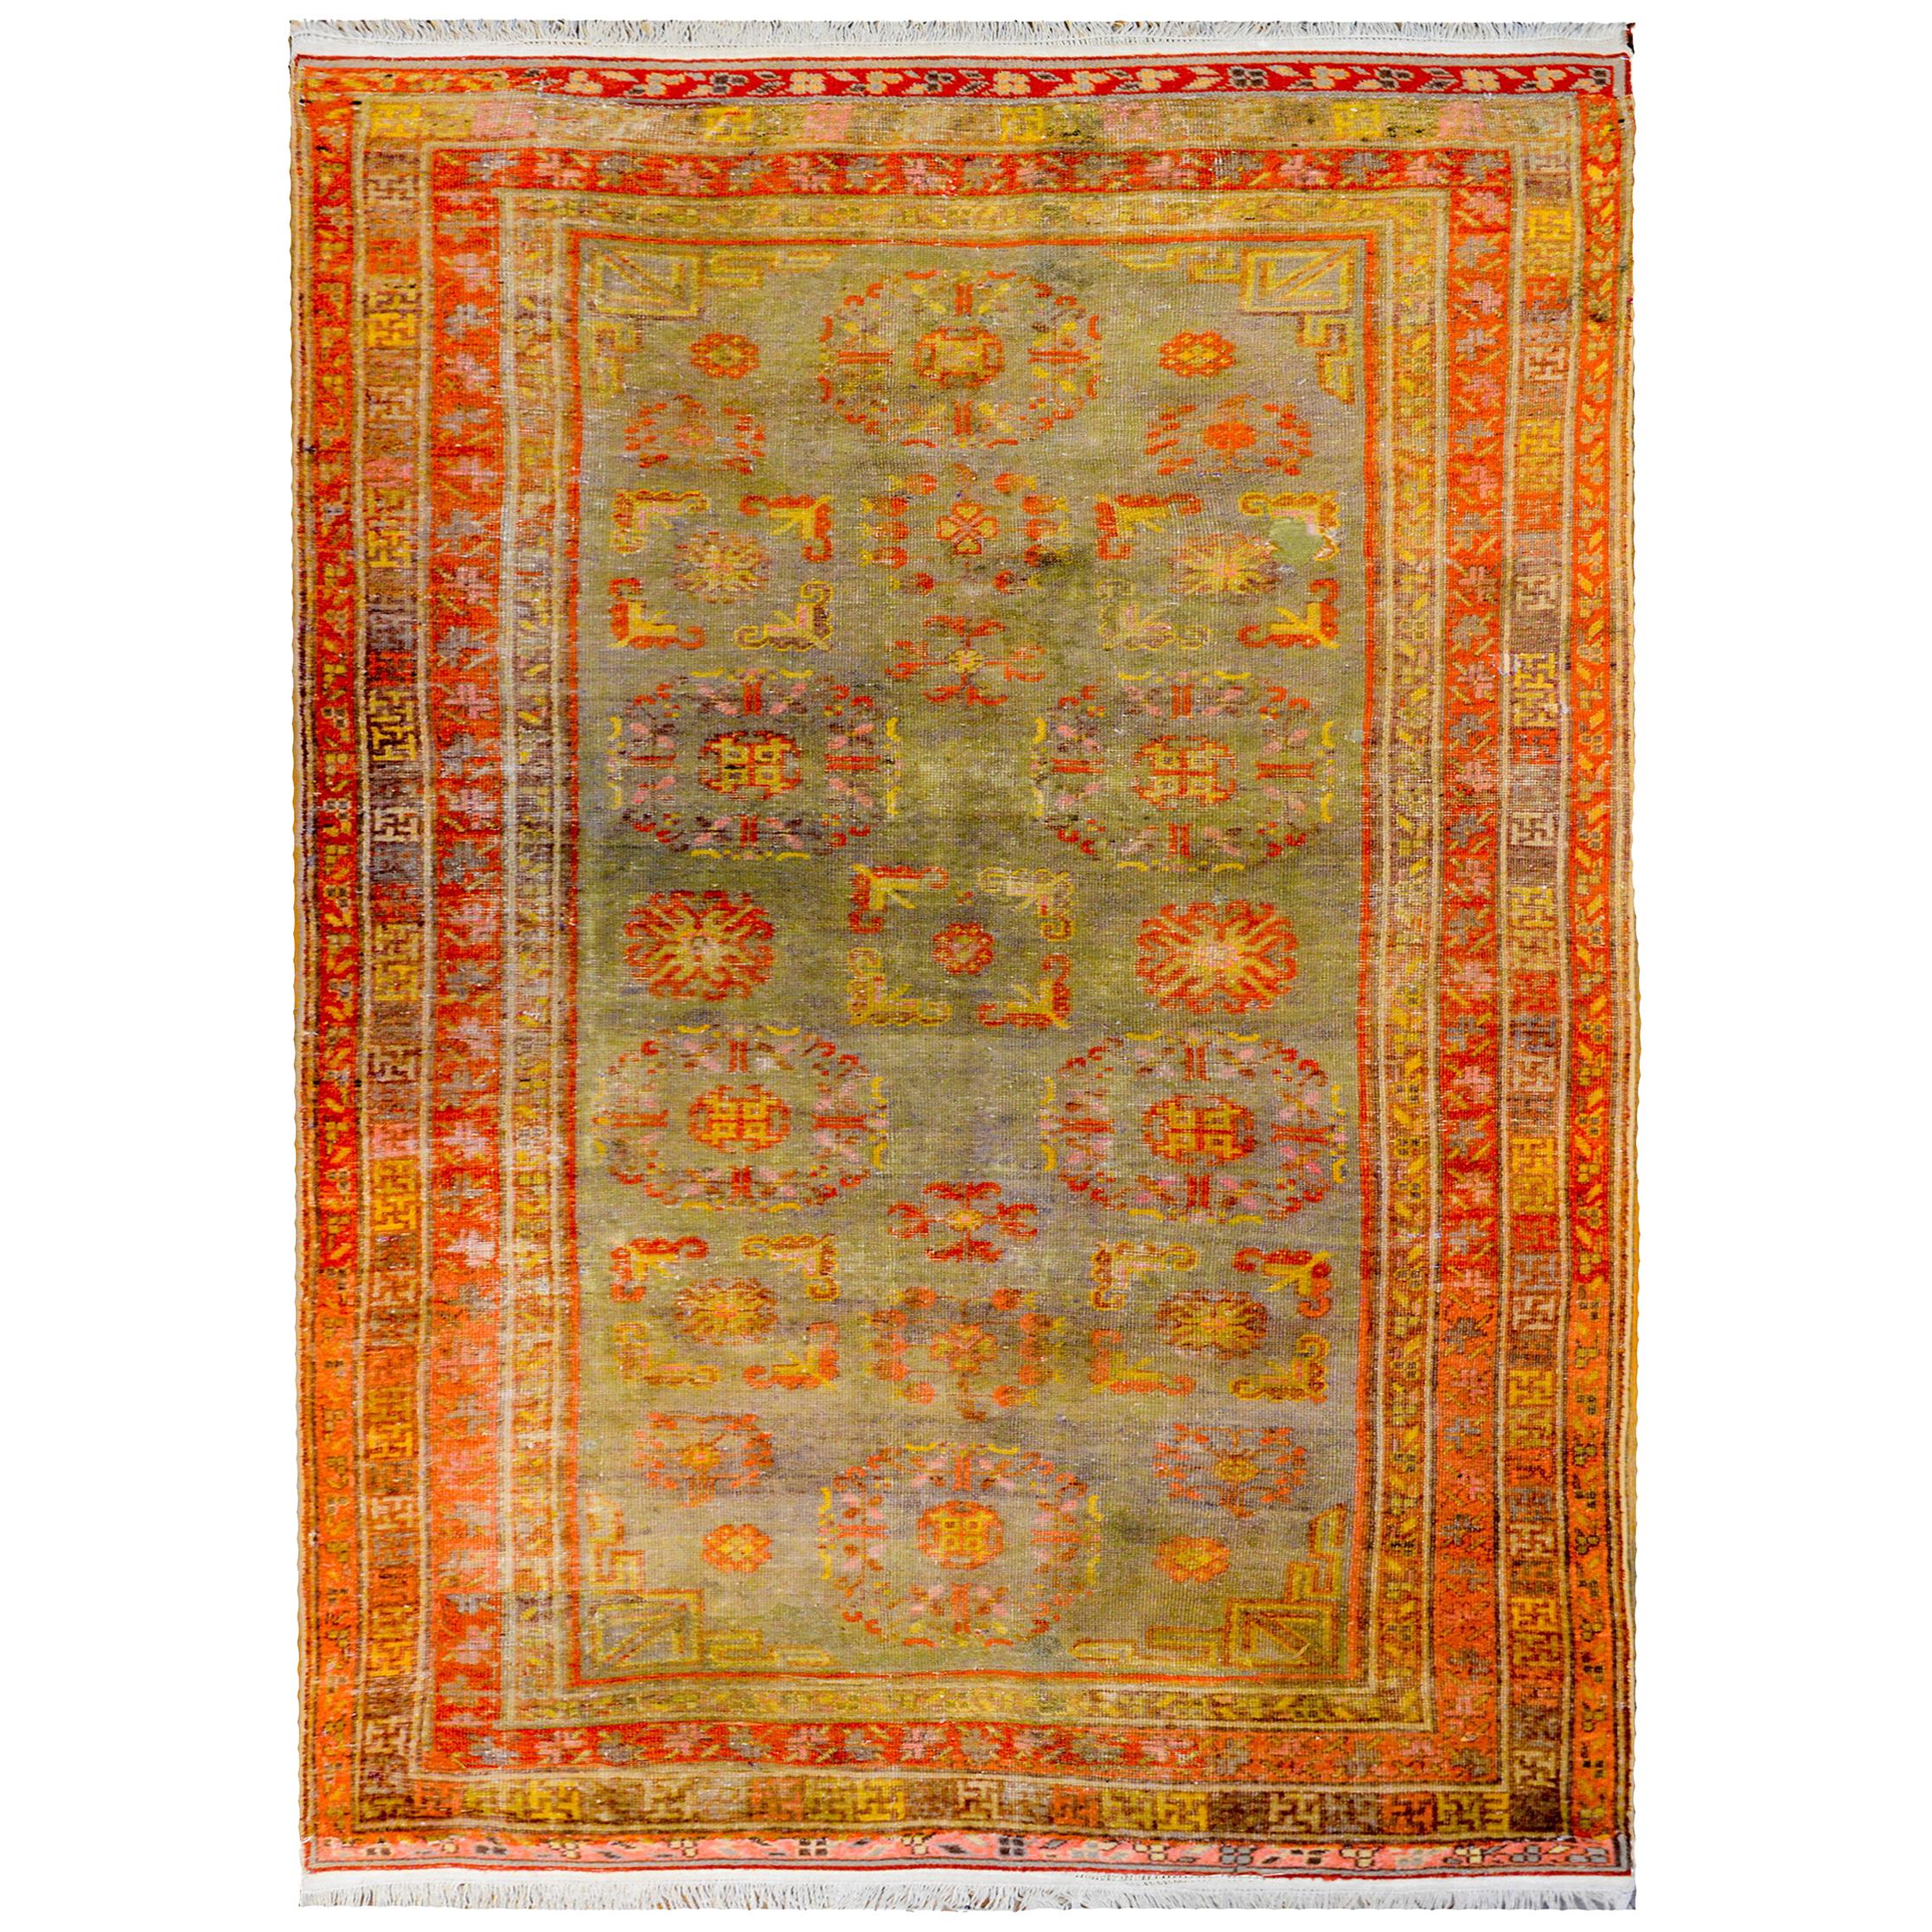 Early 20th Century Central Asian Samarghand Rug